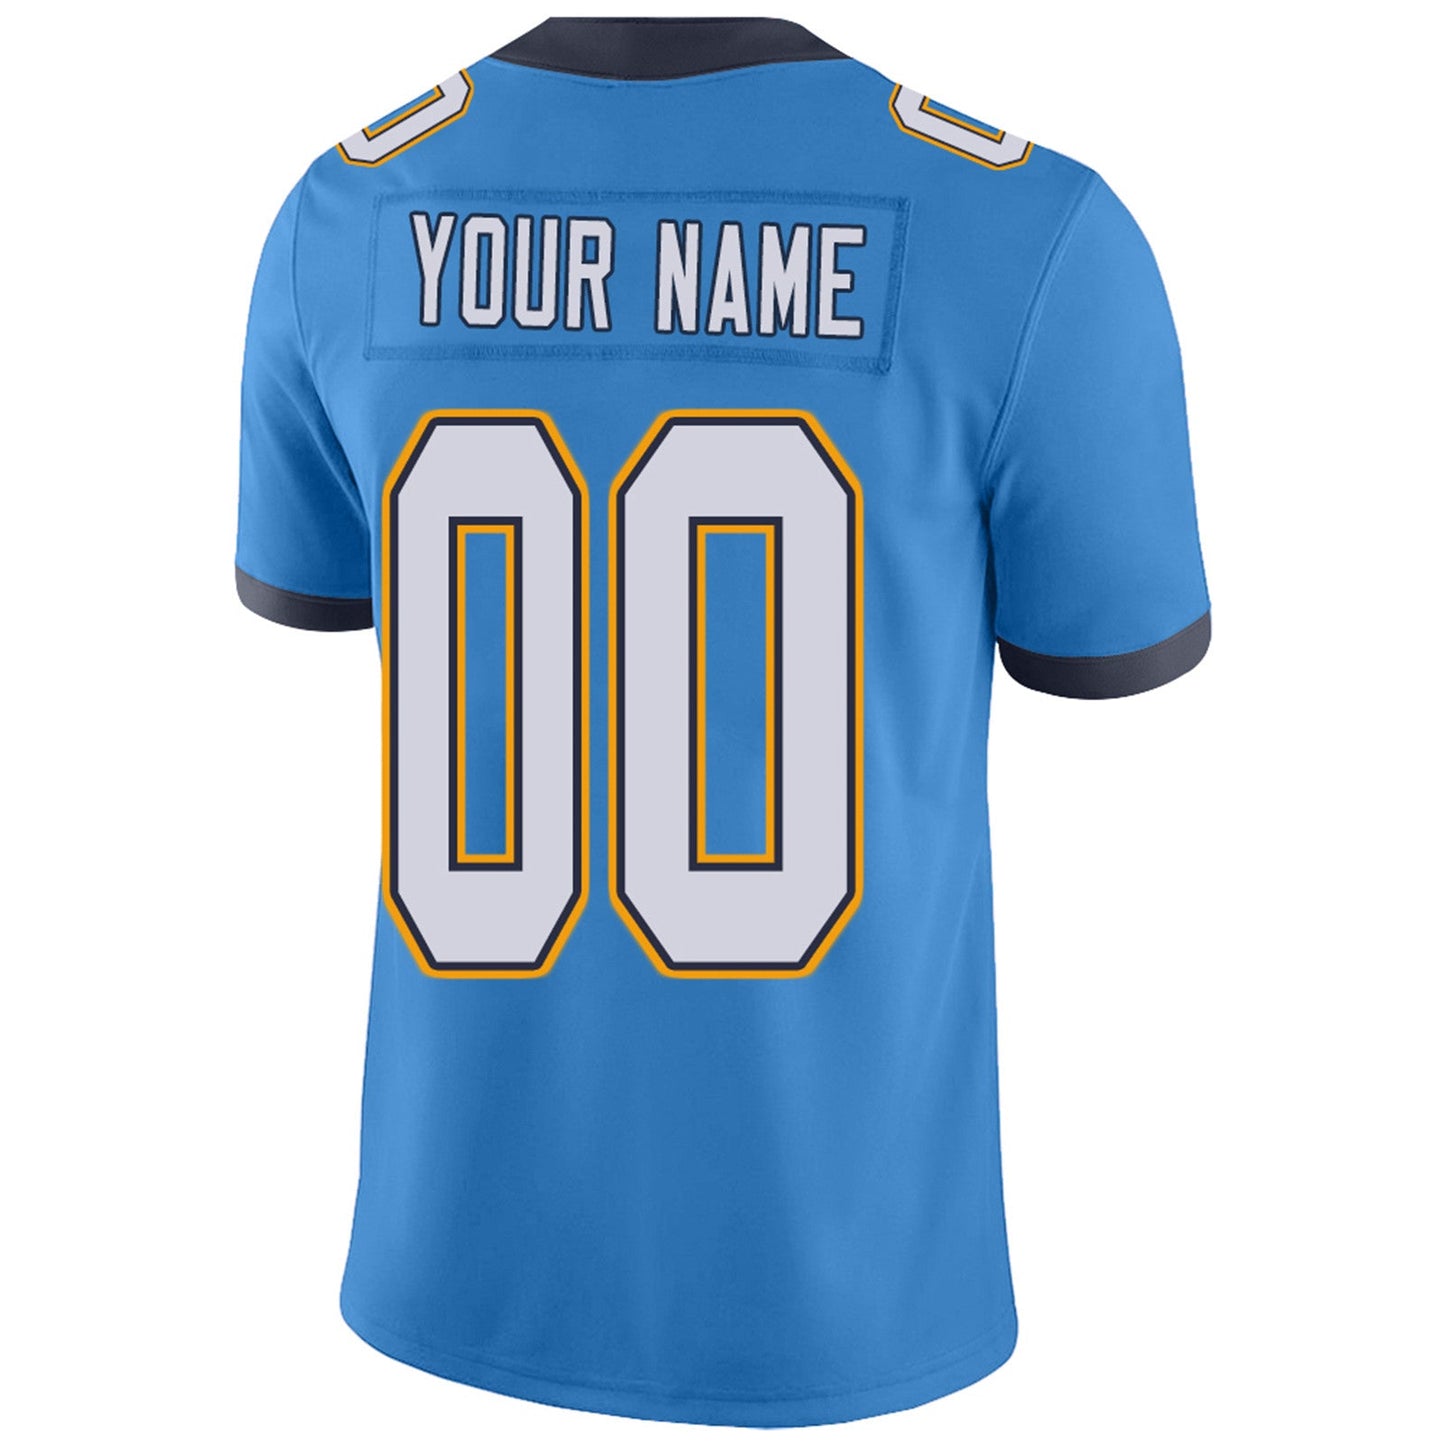 Custom LA.Chargers Football Jerseys Team Player or Personalized Design Your Own Name for Men's Women's Youth Jerseys Navy